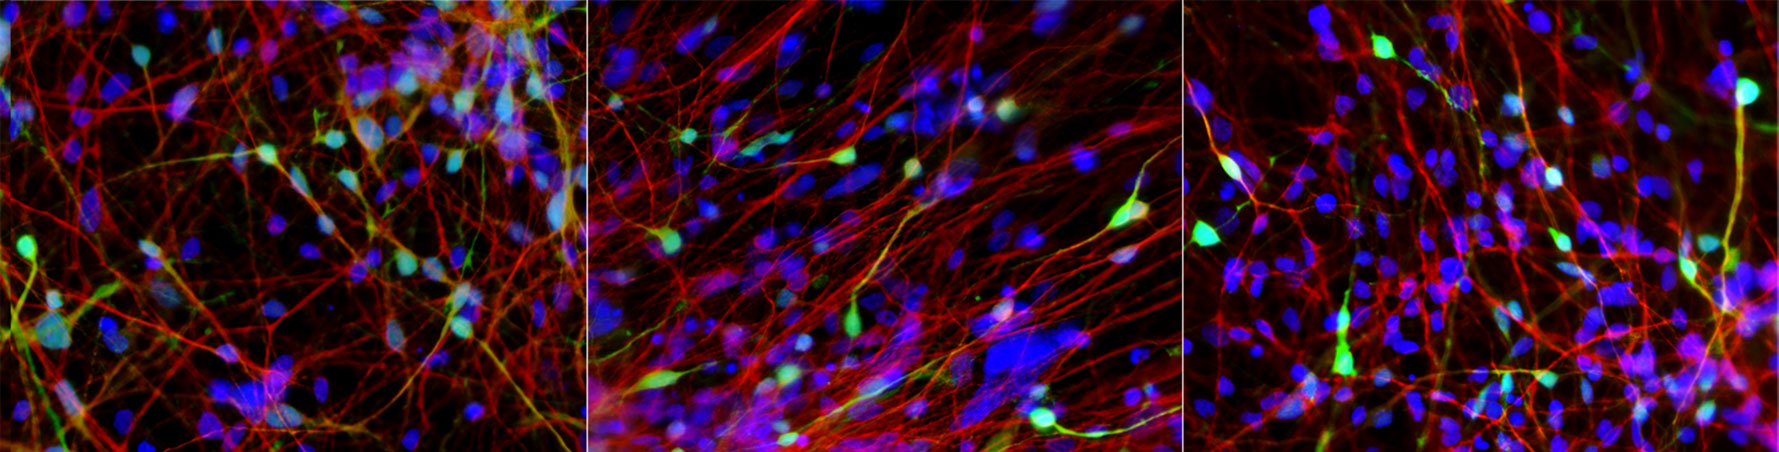 From left: iPSC-derived dentate gyrus (DG)-like neurons (green) from control subject; bipolar lithium responder; and bipolar lithium nonresponder. While the percentage of DG-like neurons is the same for control and bipolar, the gene activation profiles are different and the nonresponder has low levels of Lef1.